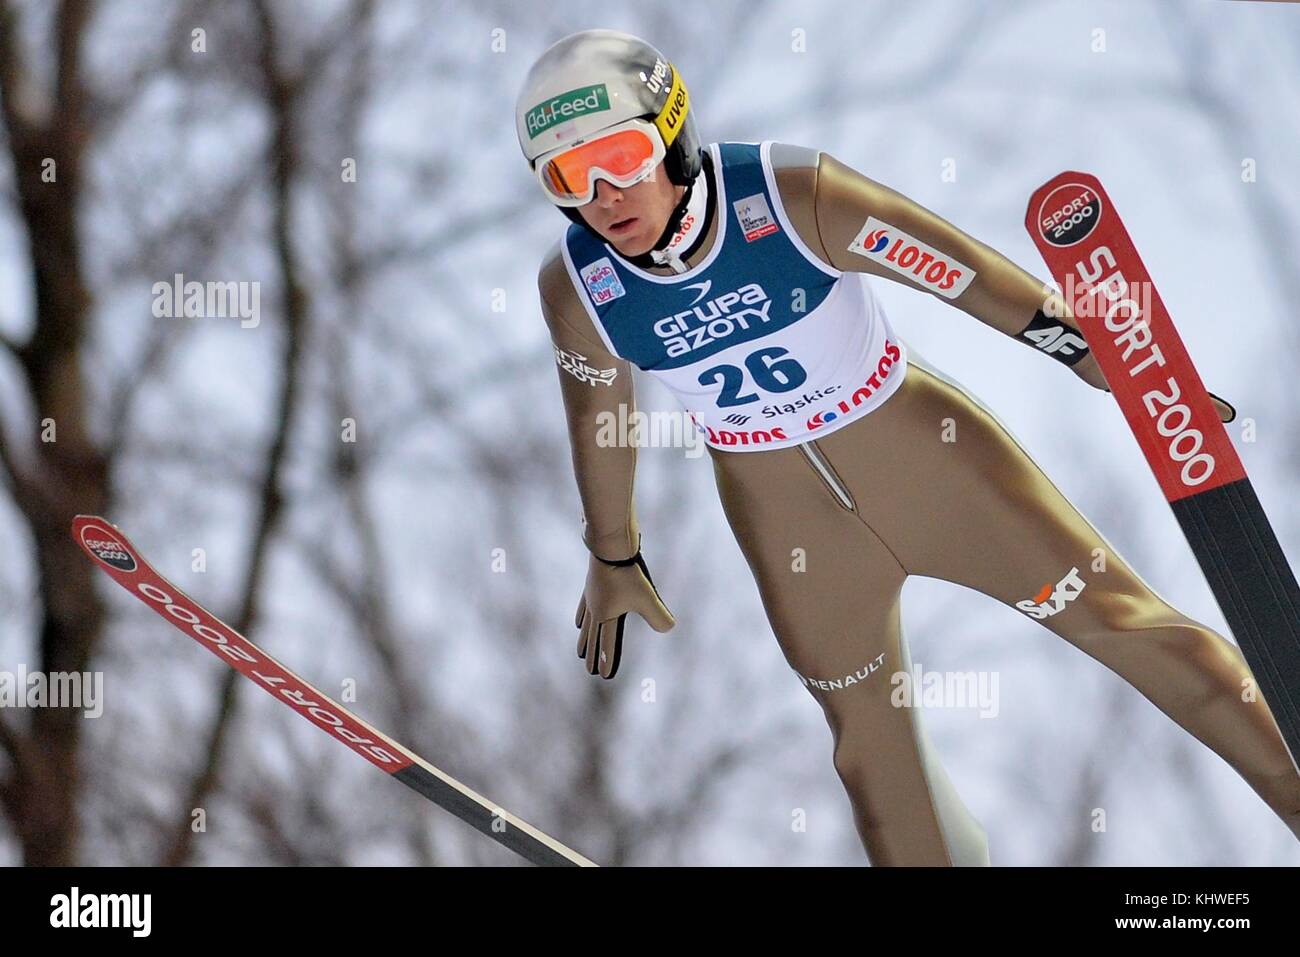 Wisla, Poland. 19th Nov, 2017. FIS Ski Jumping World Cup Wisla 2017 on November 19, 2017 in Wisla, Poland. In the picture: Stefan Hula of Poland Credit: East News sp. z o.o./Alamy Live News Stock Photo